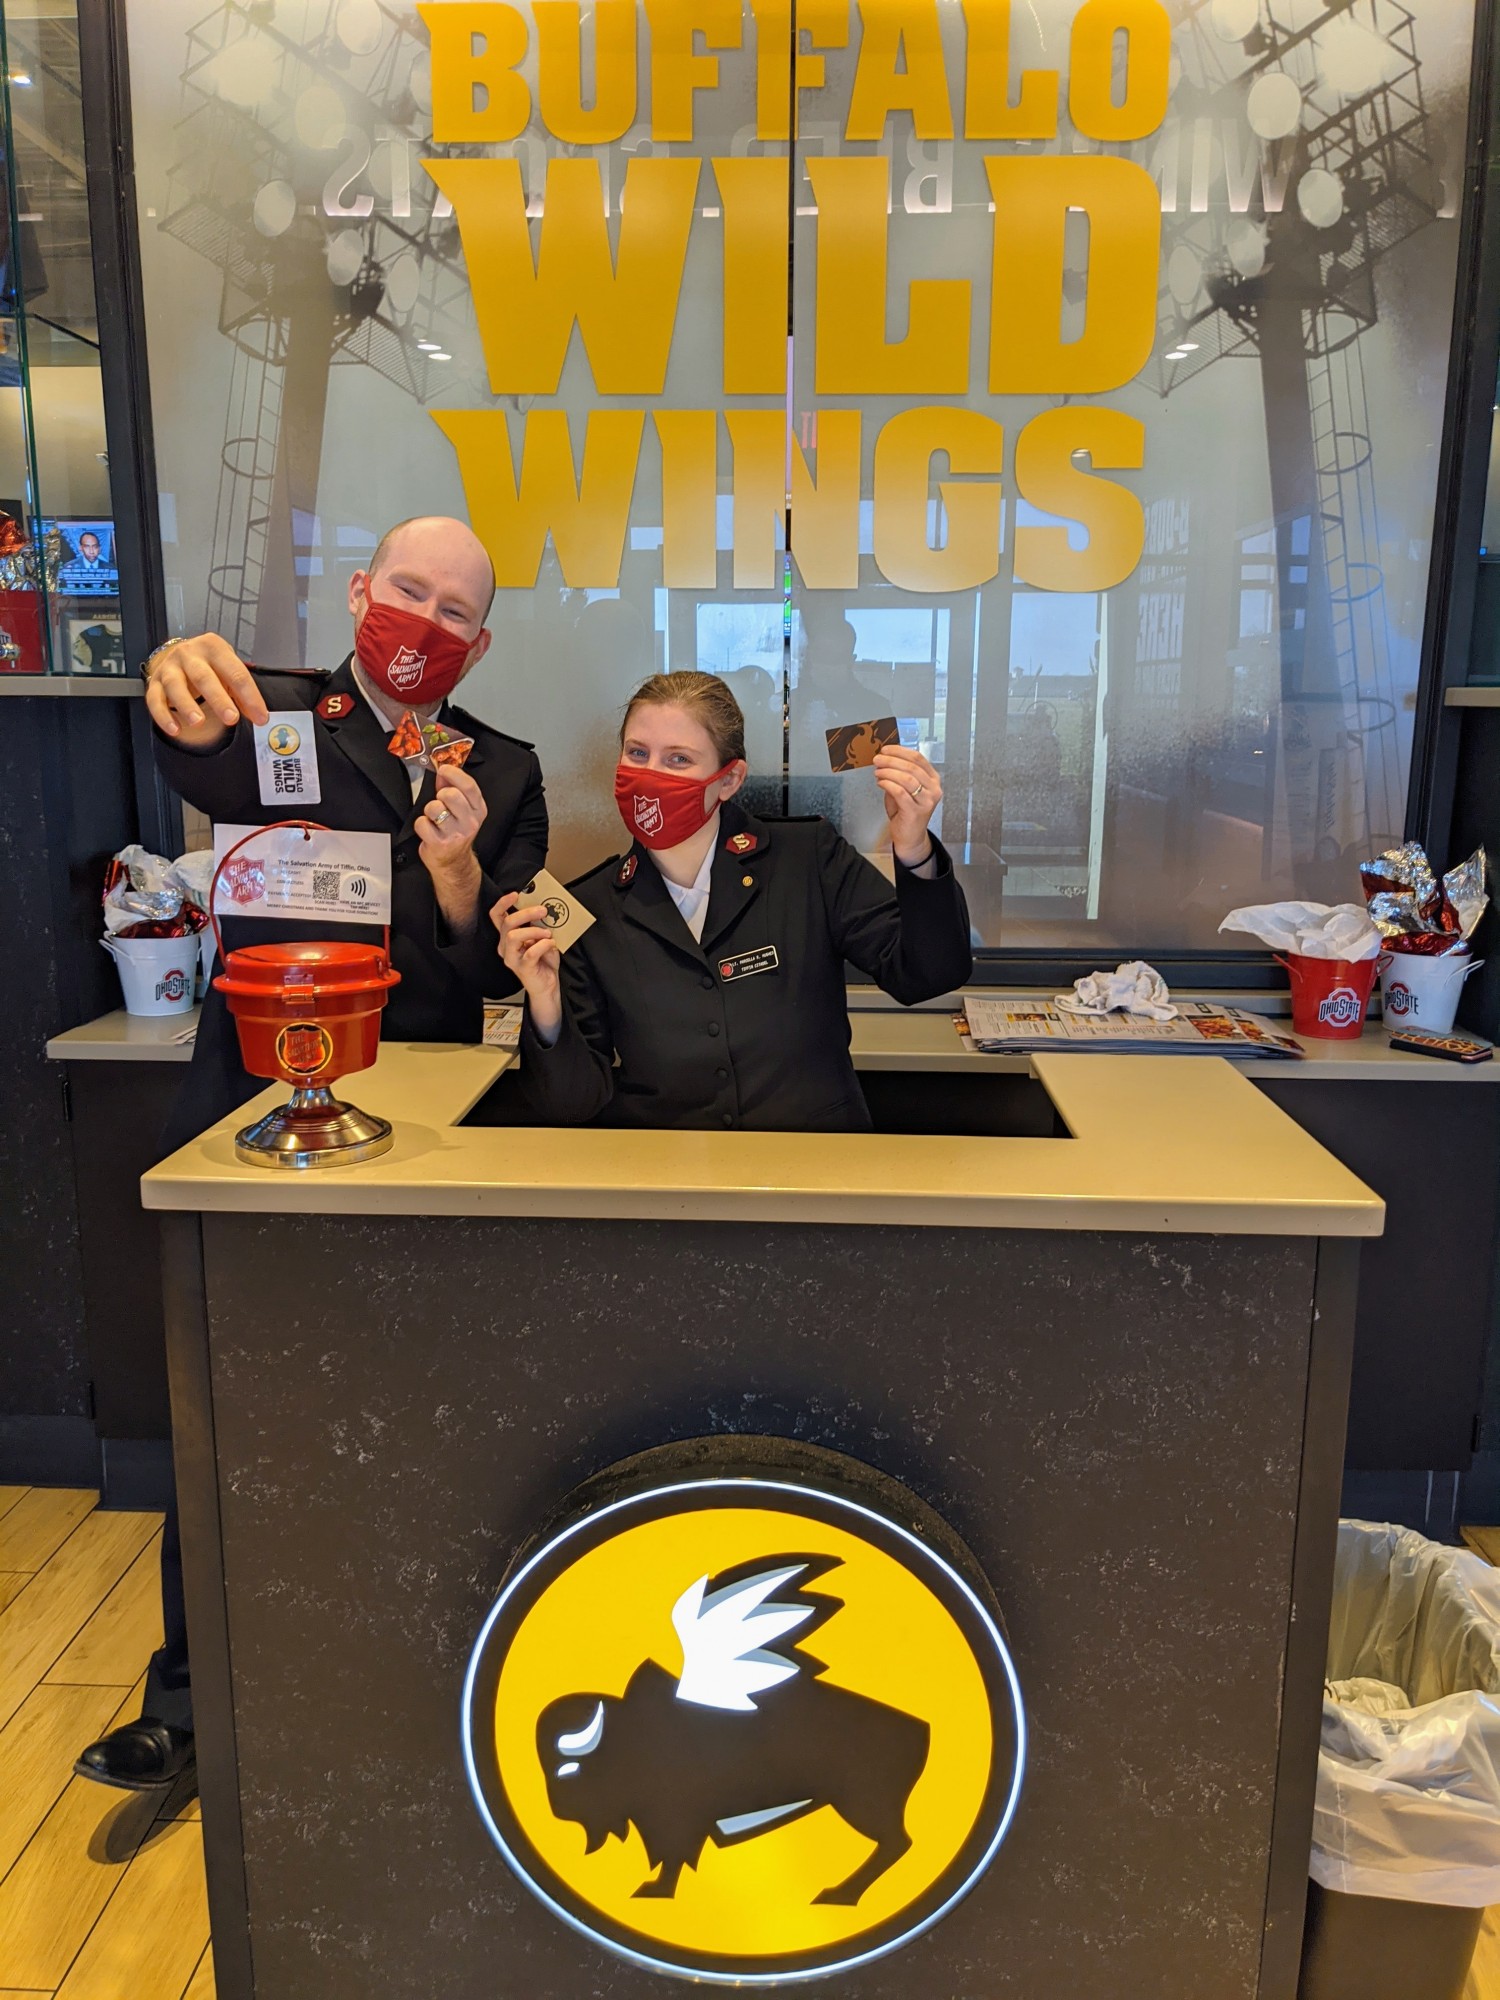 The Salvation Amy has announced a partnership with Buffalo Wild Wings